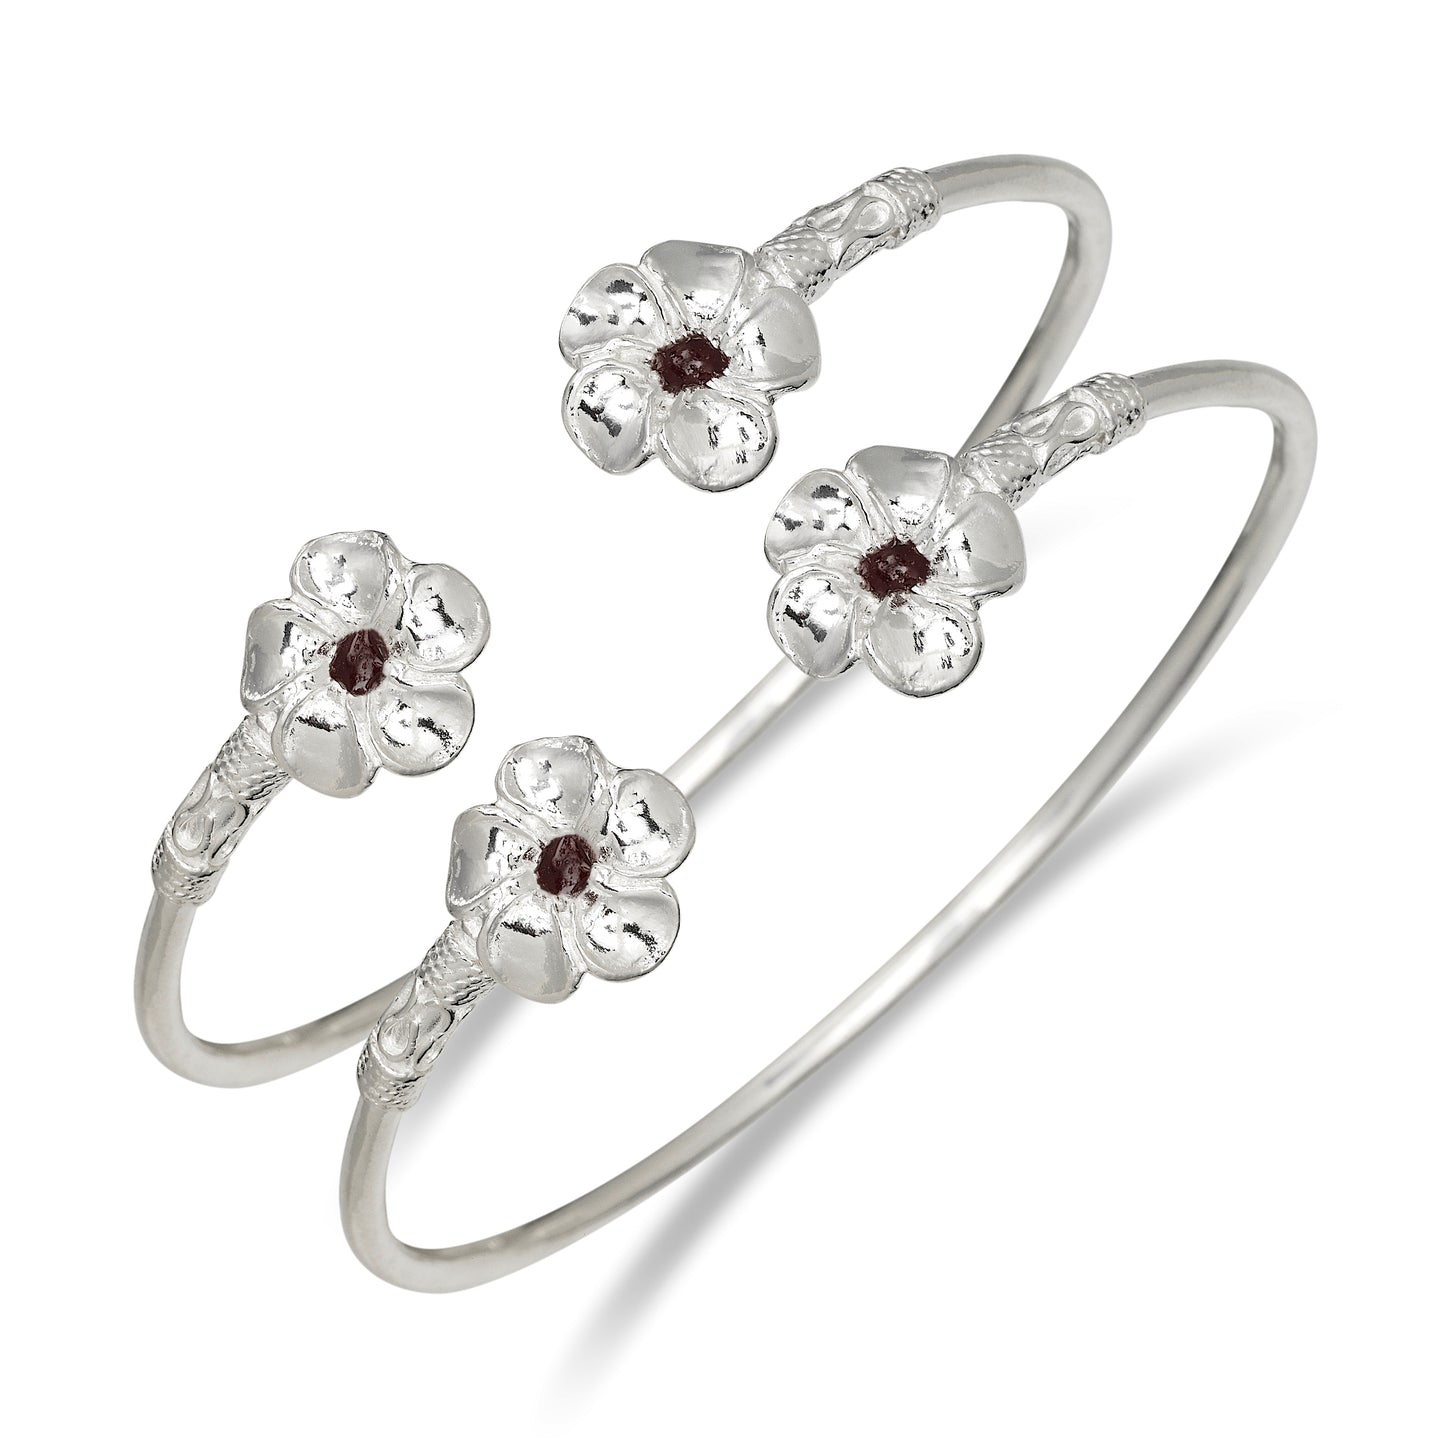 Better Jewelry Flower .925 Sterling Silver West Indian Bangles with Enamel dots, 1 pair